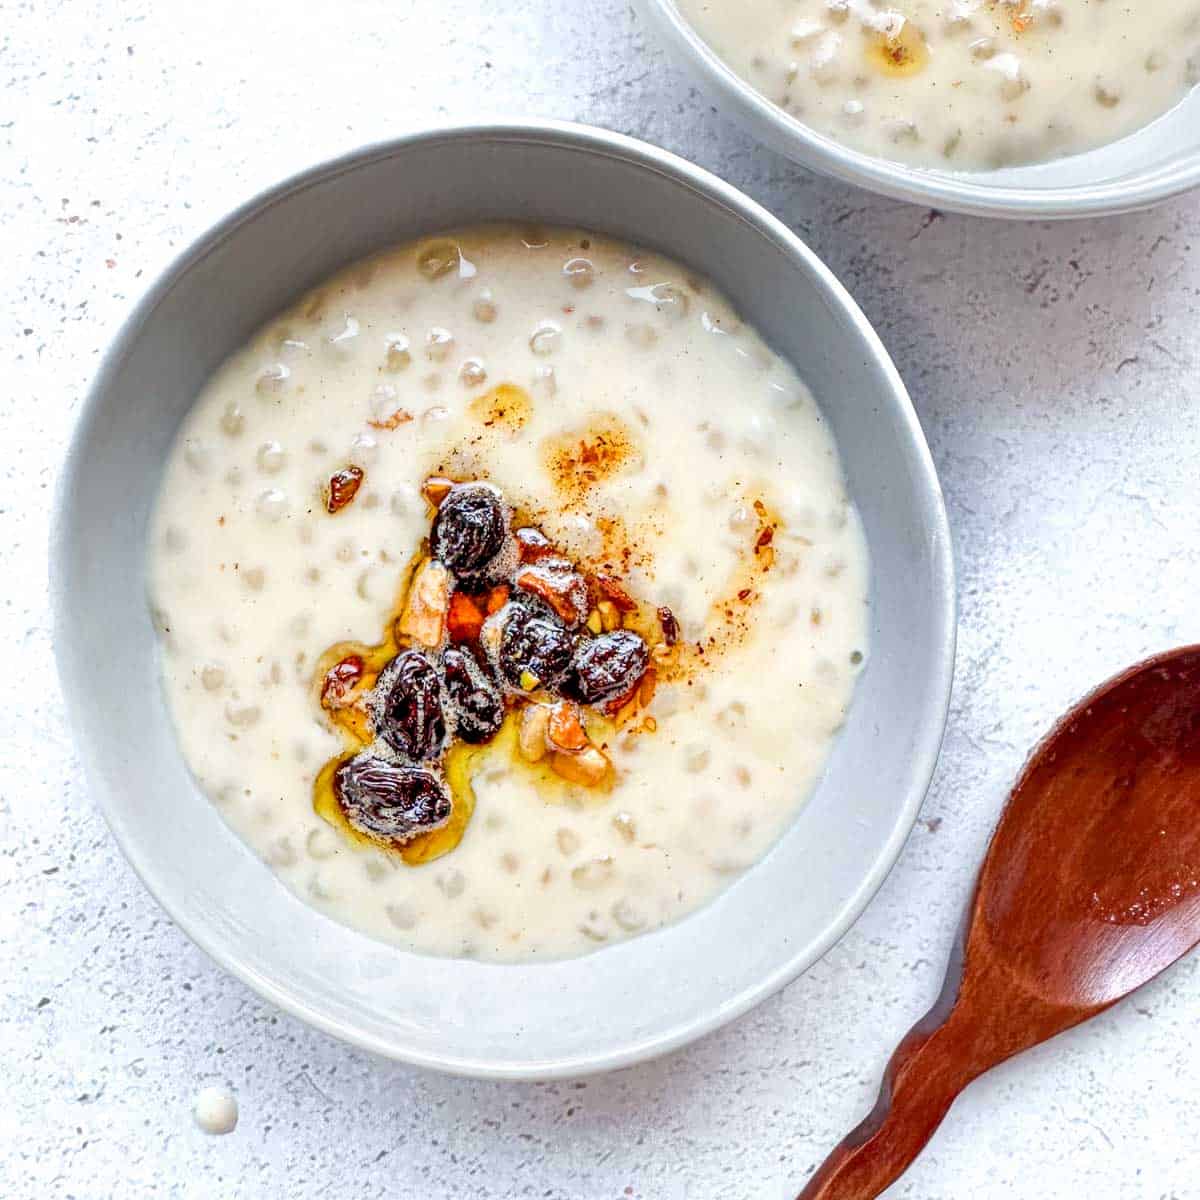 Two bowls with Indian tapioca pudding with a nut and raisin topping. A wooden spoon on the bottom right.